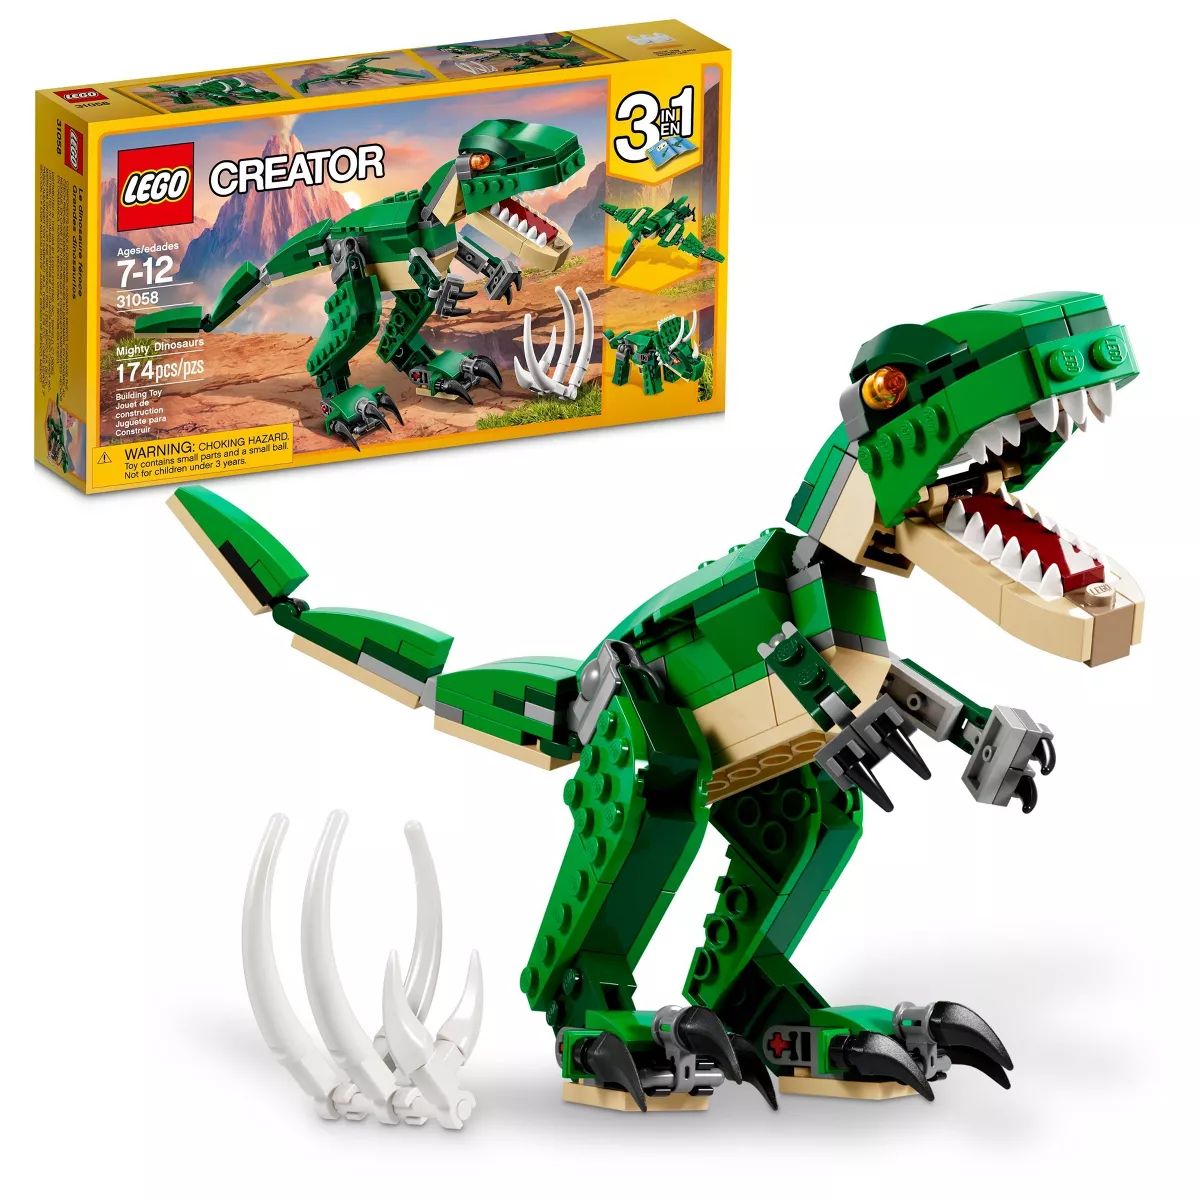 LEGO Creator 3 in 1 Mighty Dinosaurs Model Building Set 31058 | Target